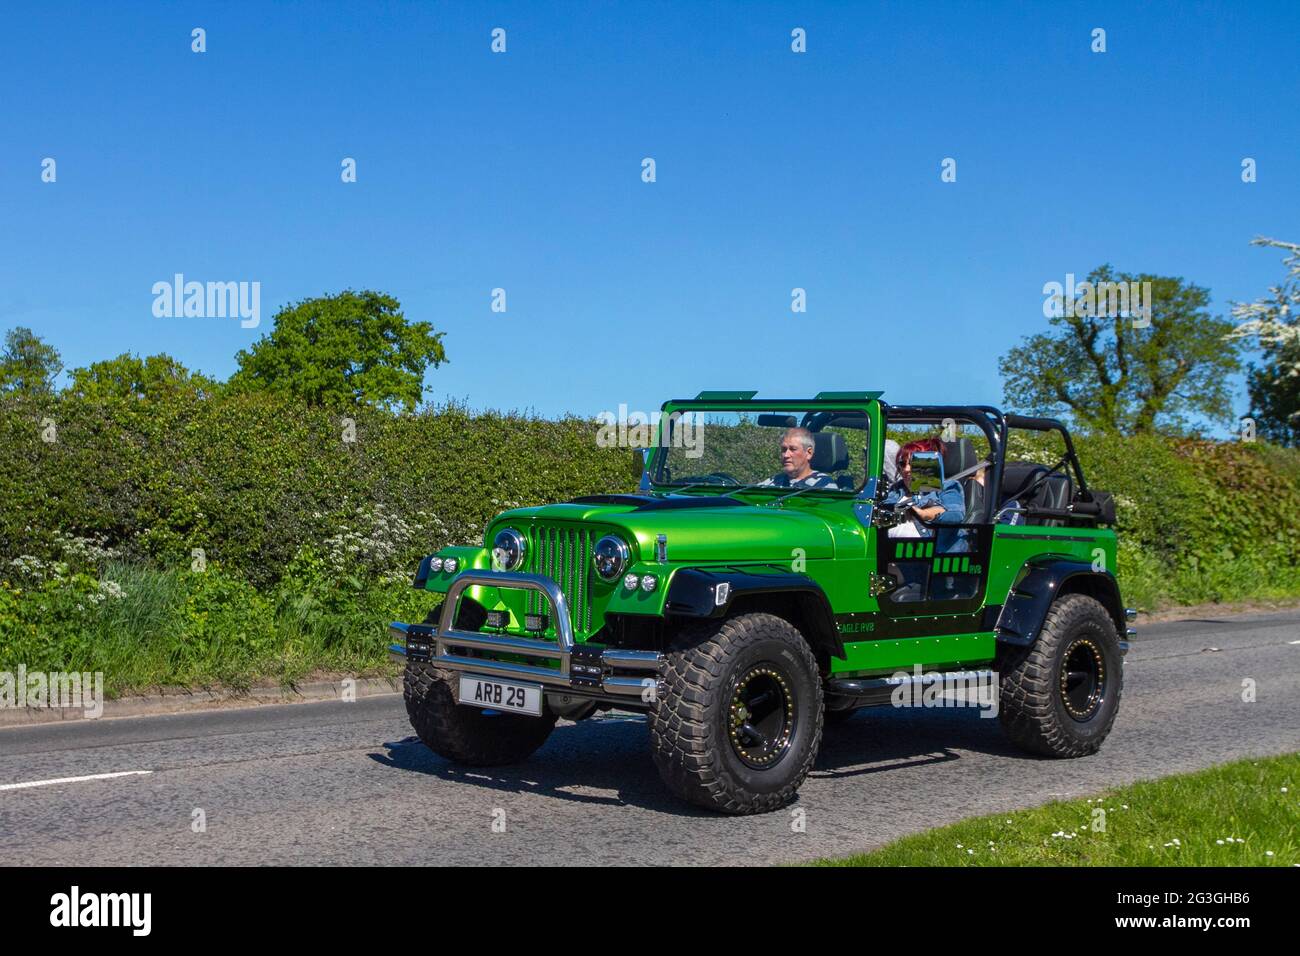 1999 90s nineties Green EAGLE RV 8 REPLICA  ES V8I 95 SUV  4554 cc petrol gas  en-route to Capesthorne Hall classic May car show, Cheshire, UK Stock Photo